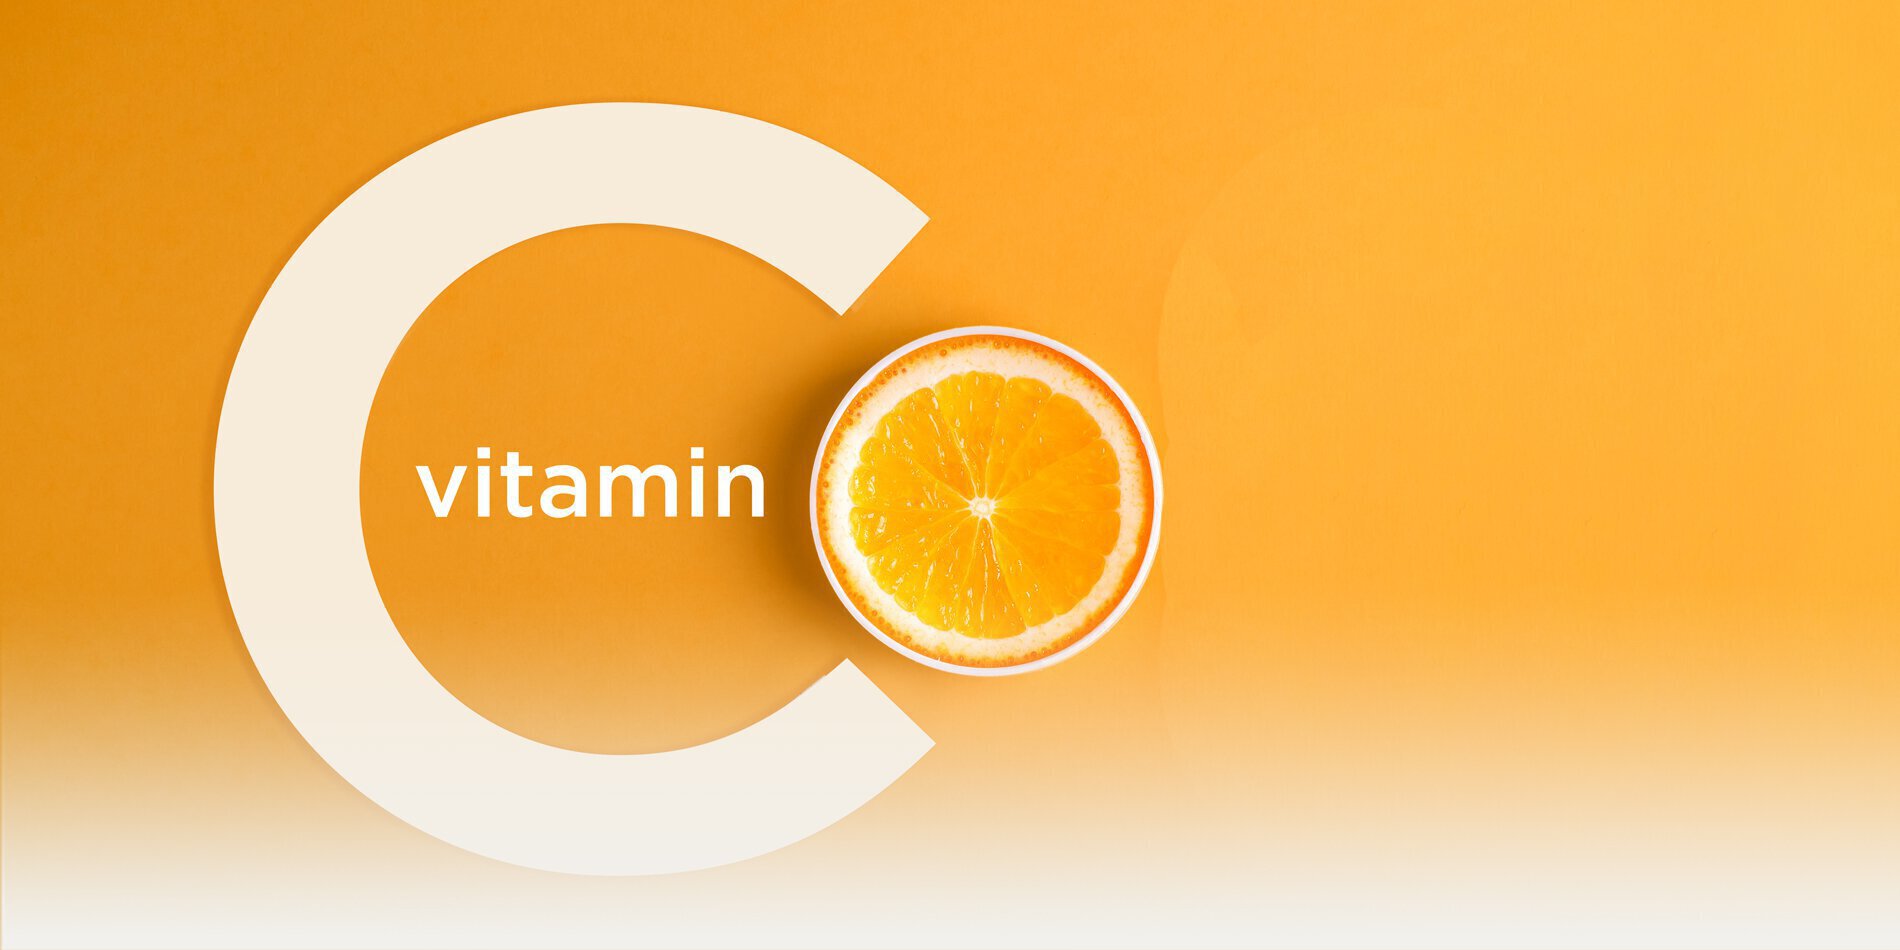 C the Light: Benefits of Using Vitamin C and the Products We Love